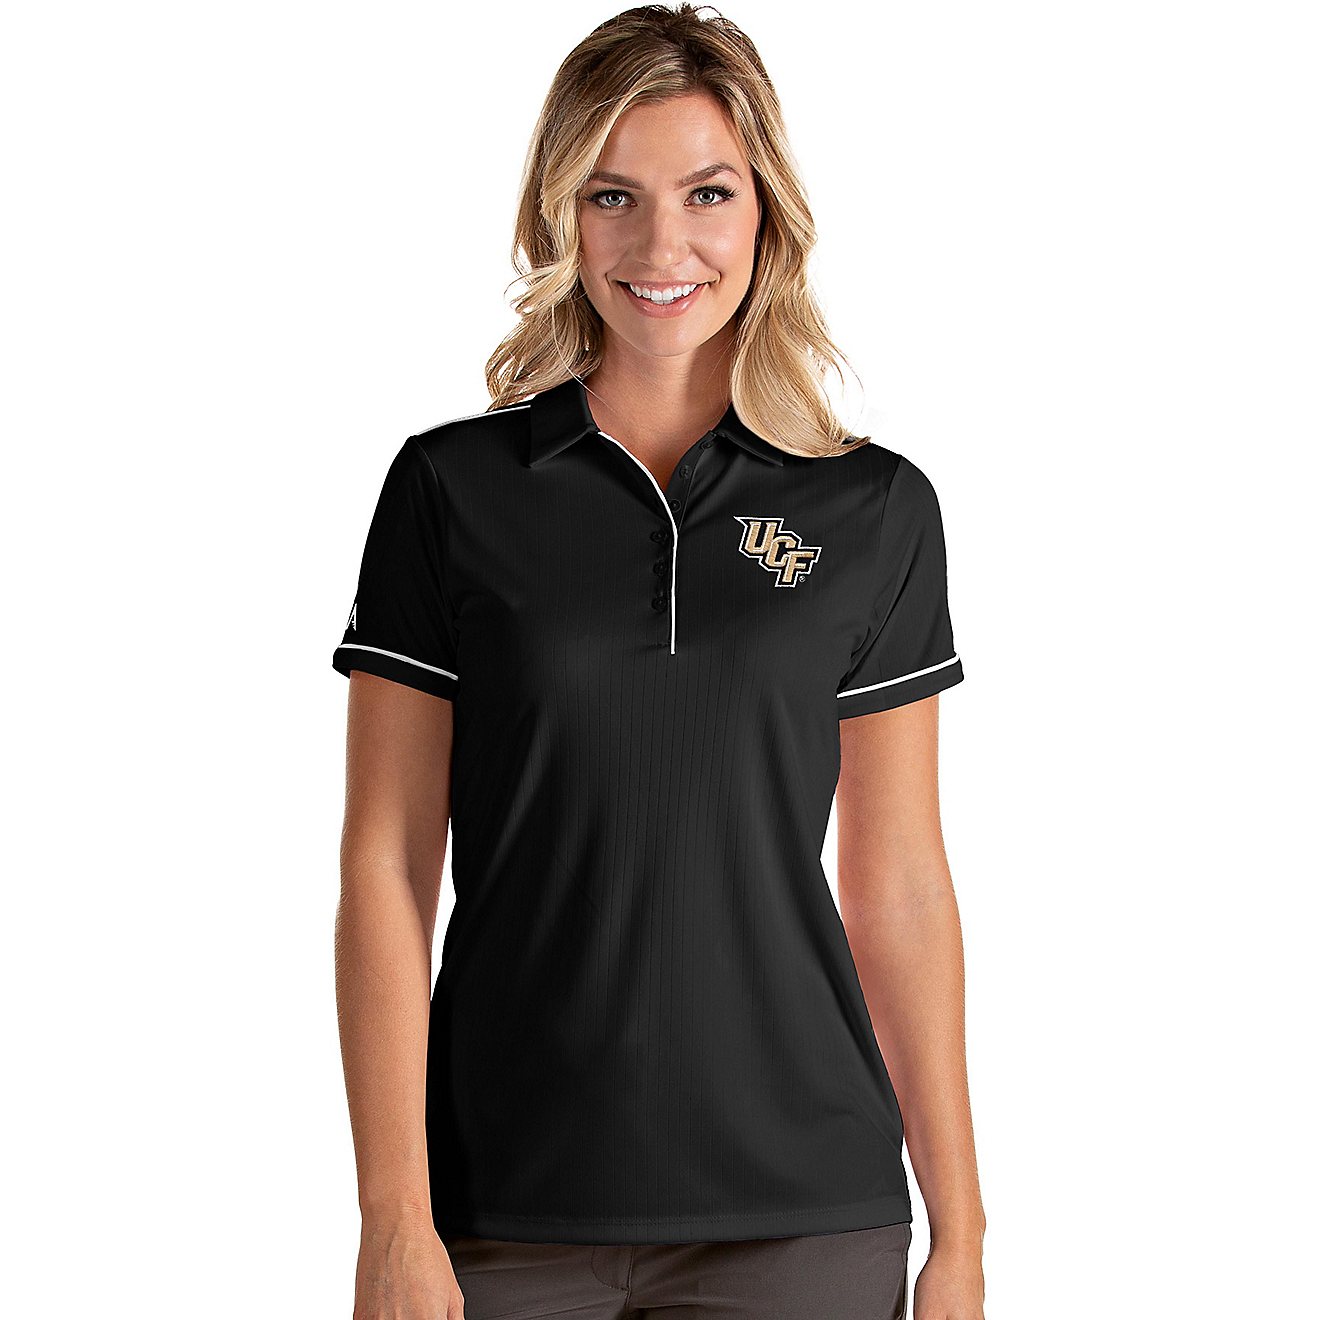 Antigua Women's University of Central Florida Salute Polo Shirt                                                                  - view number 1